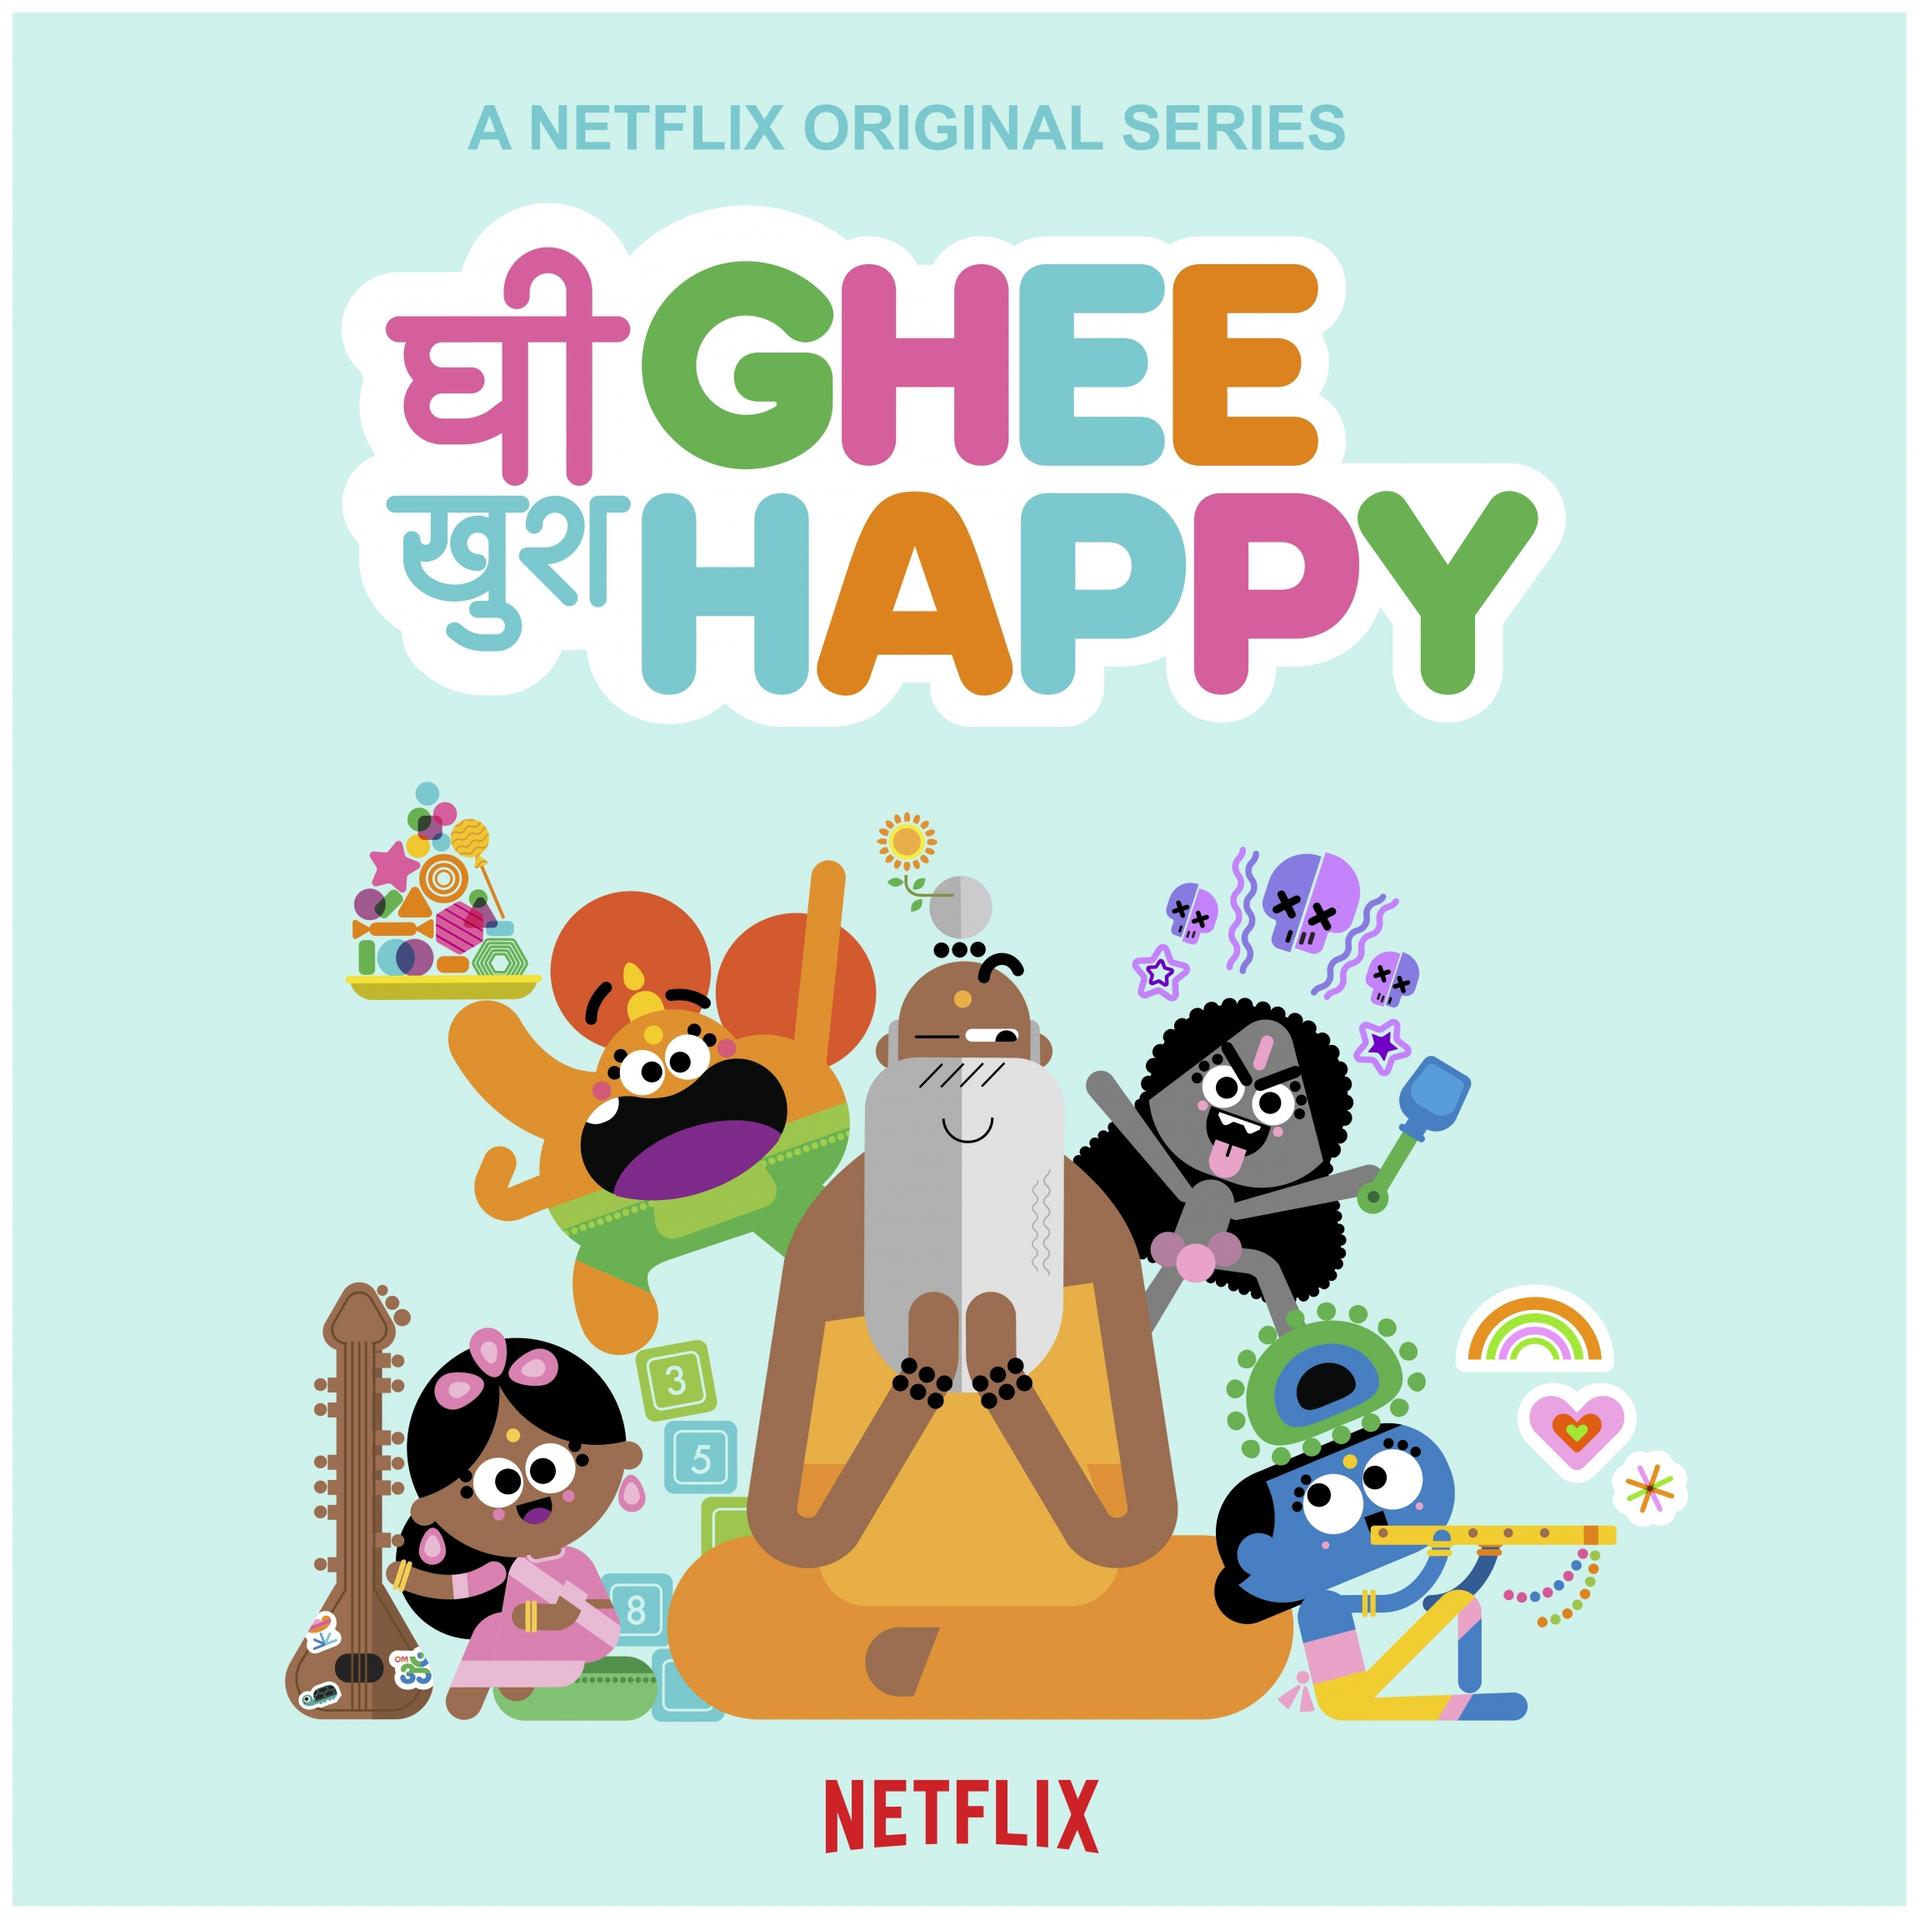 Netflix promotional material for "Ghee Happy"